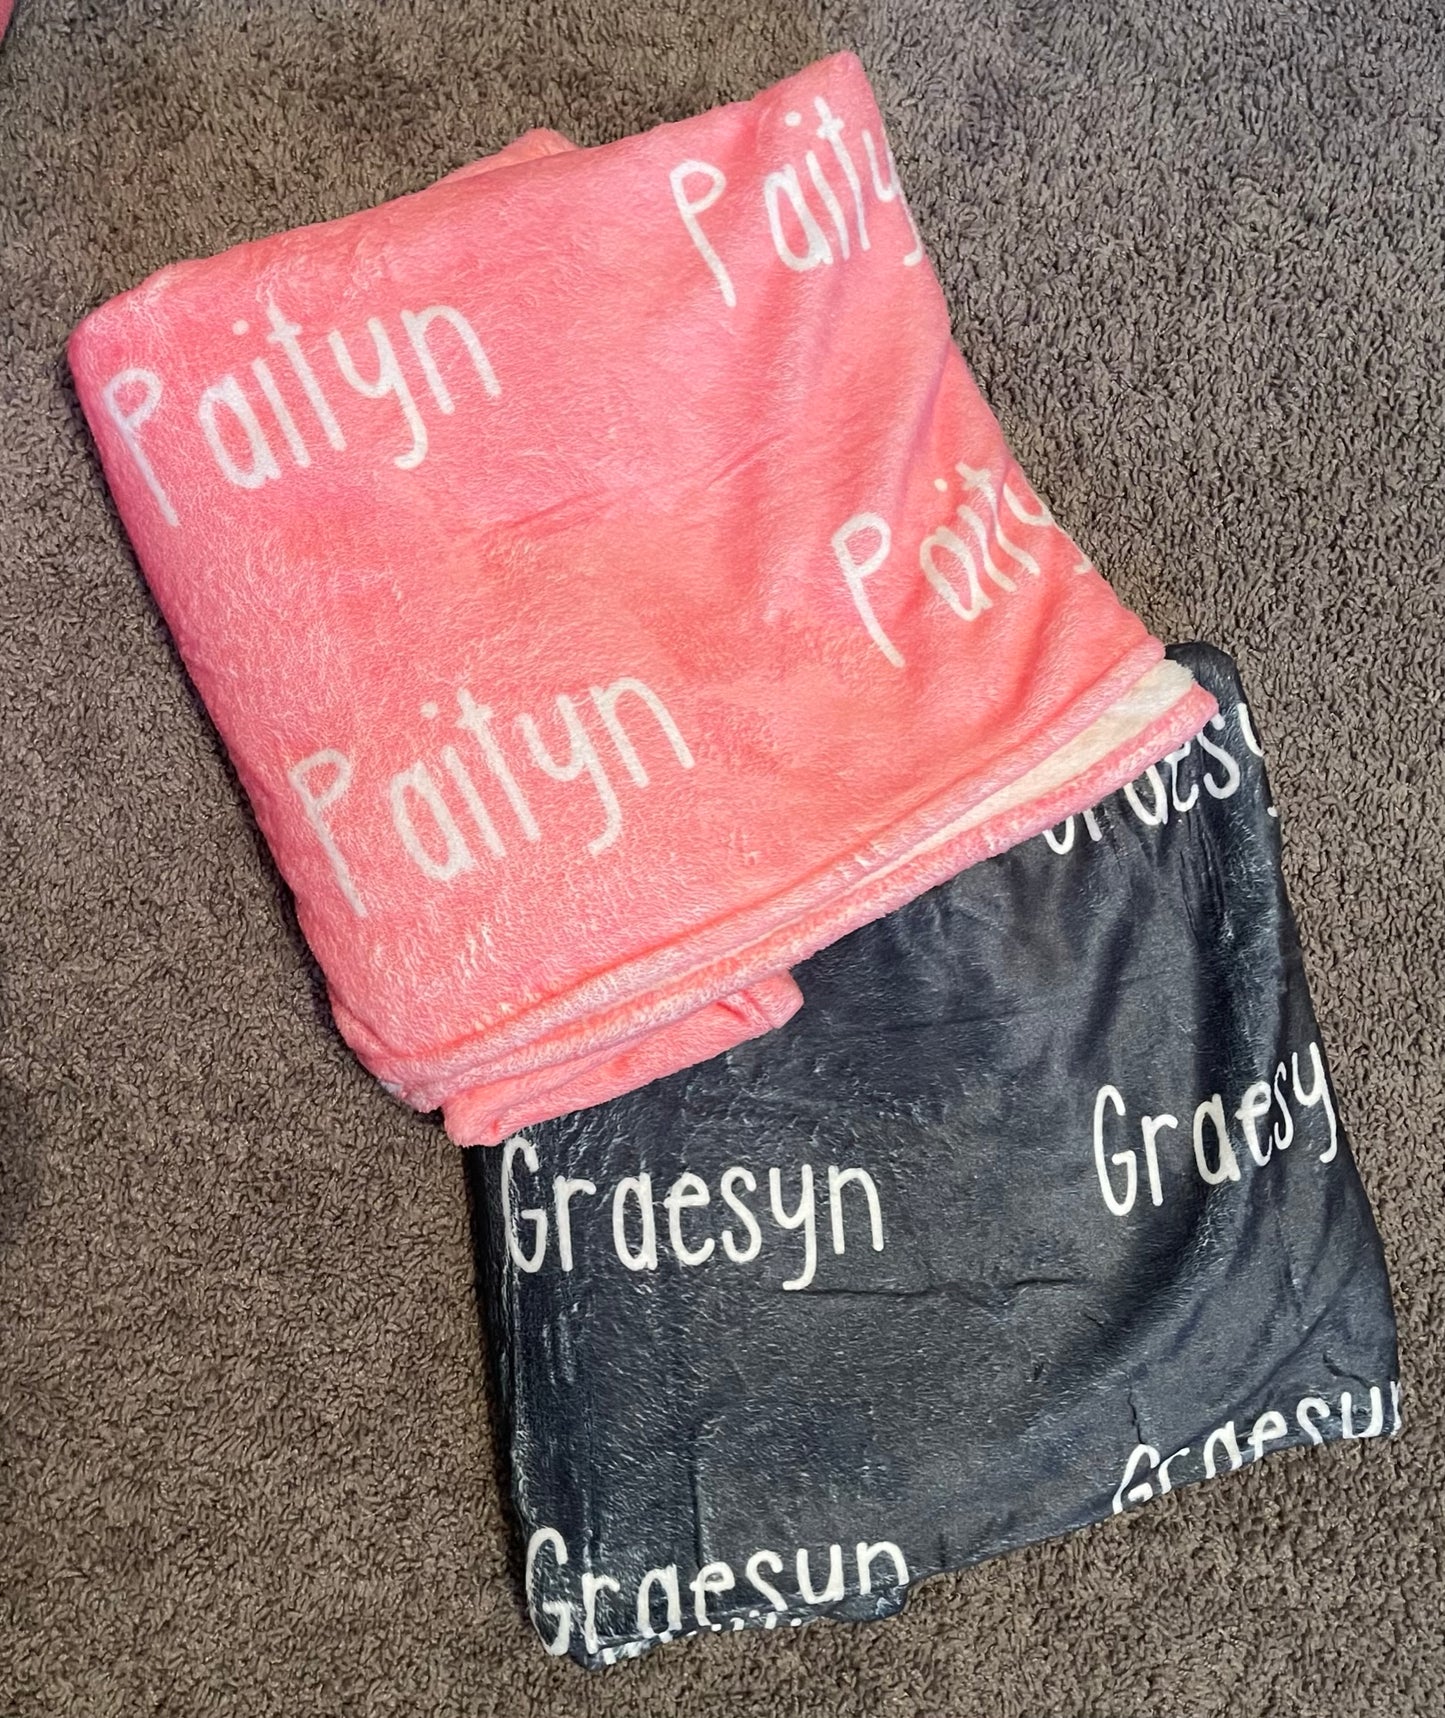 Personalized Name Blankets